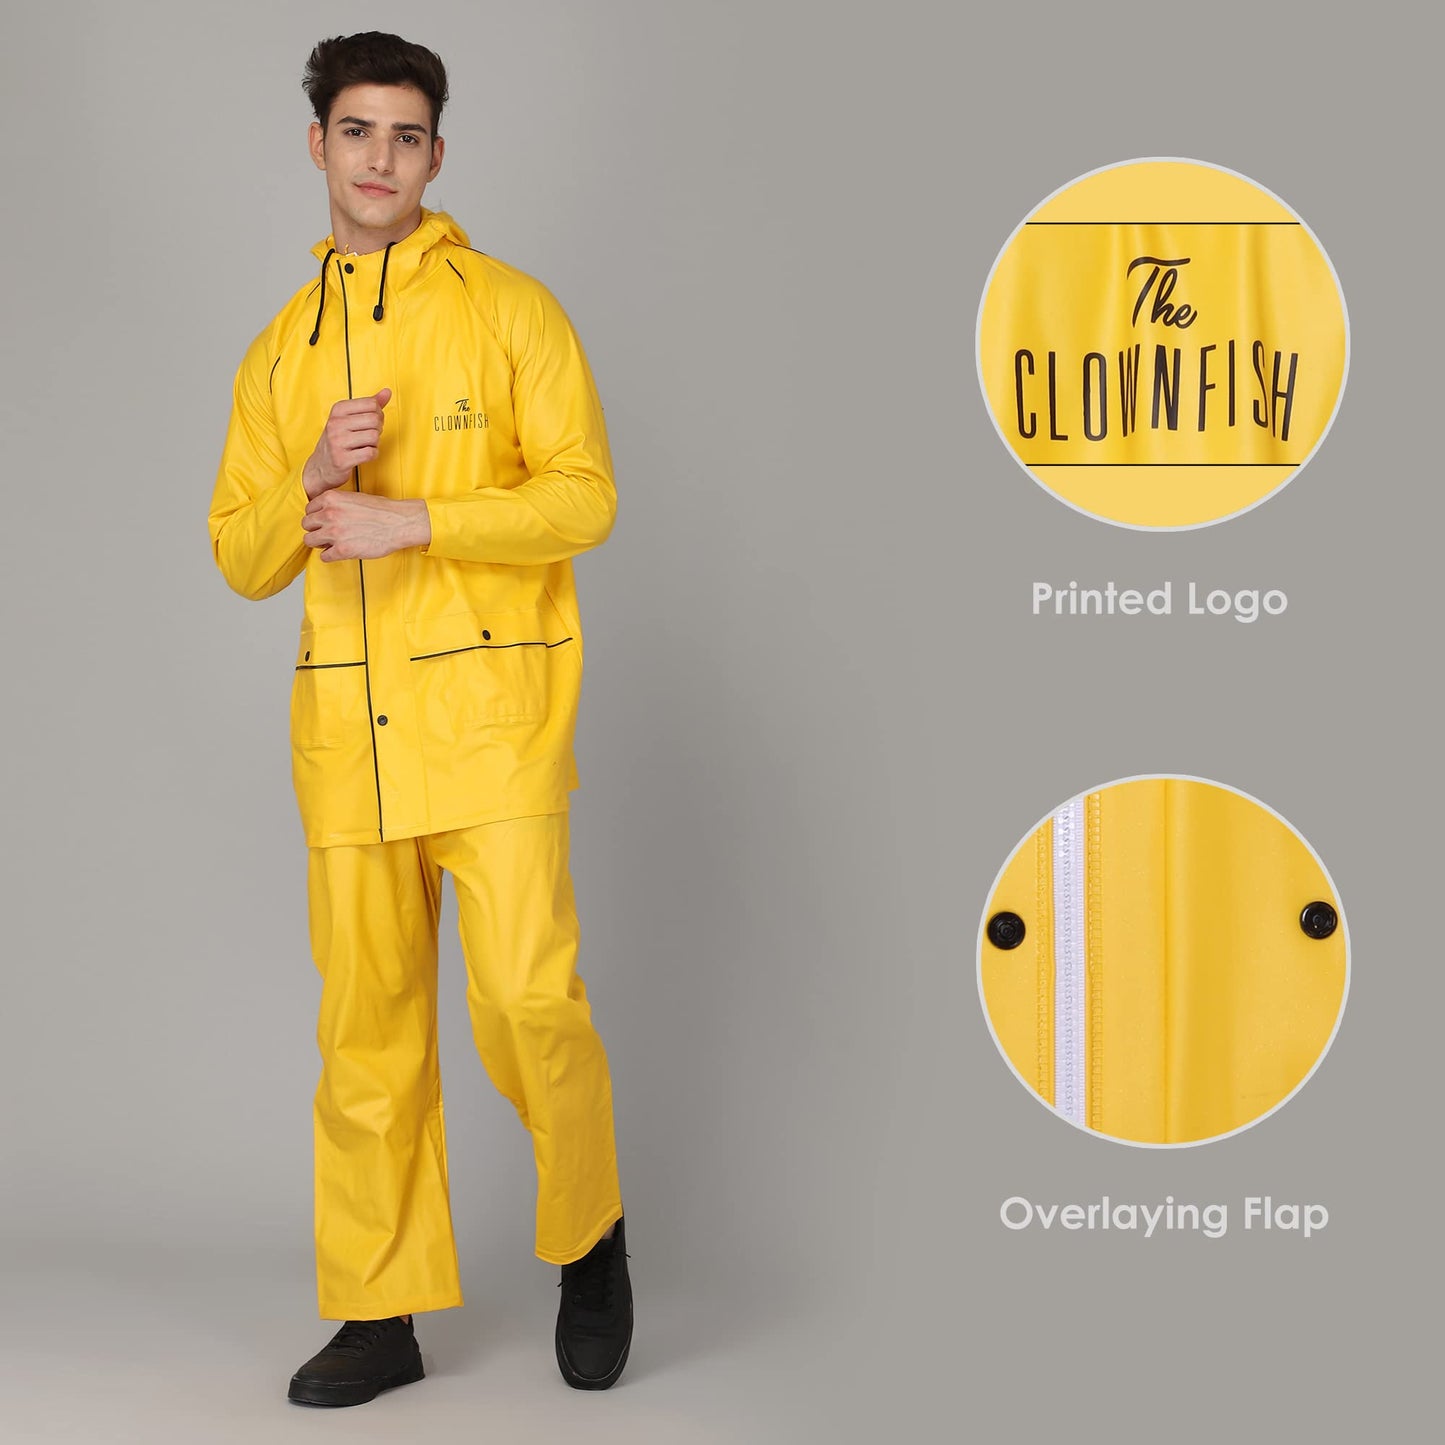 THE CLOWNFISH Rain Coat for Men Waterproof for Bike Reversible Double Layer with Hood Raincoat for Men. Set of Top and Bottom Packed in a Storage Bag Opener Pro Series (Black, XX-Large)